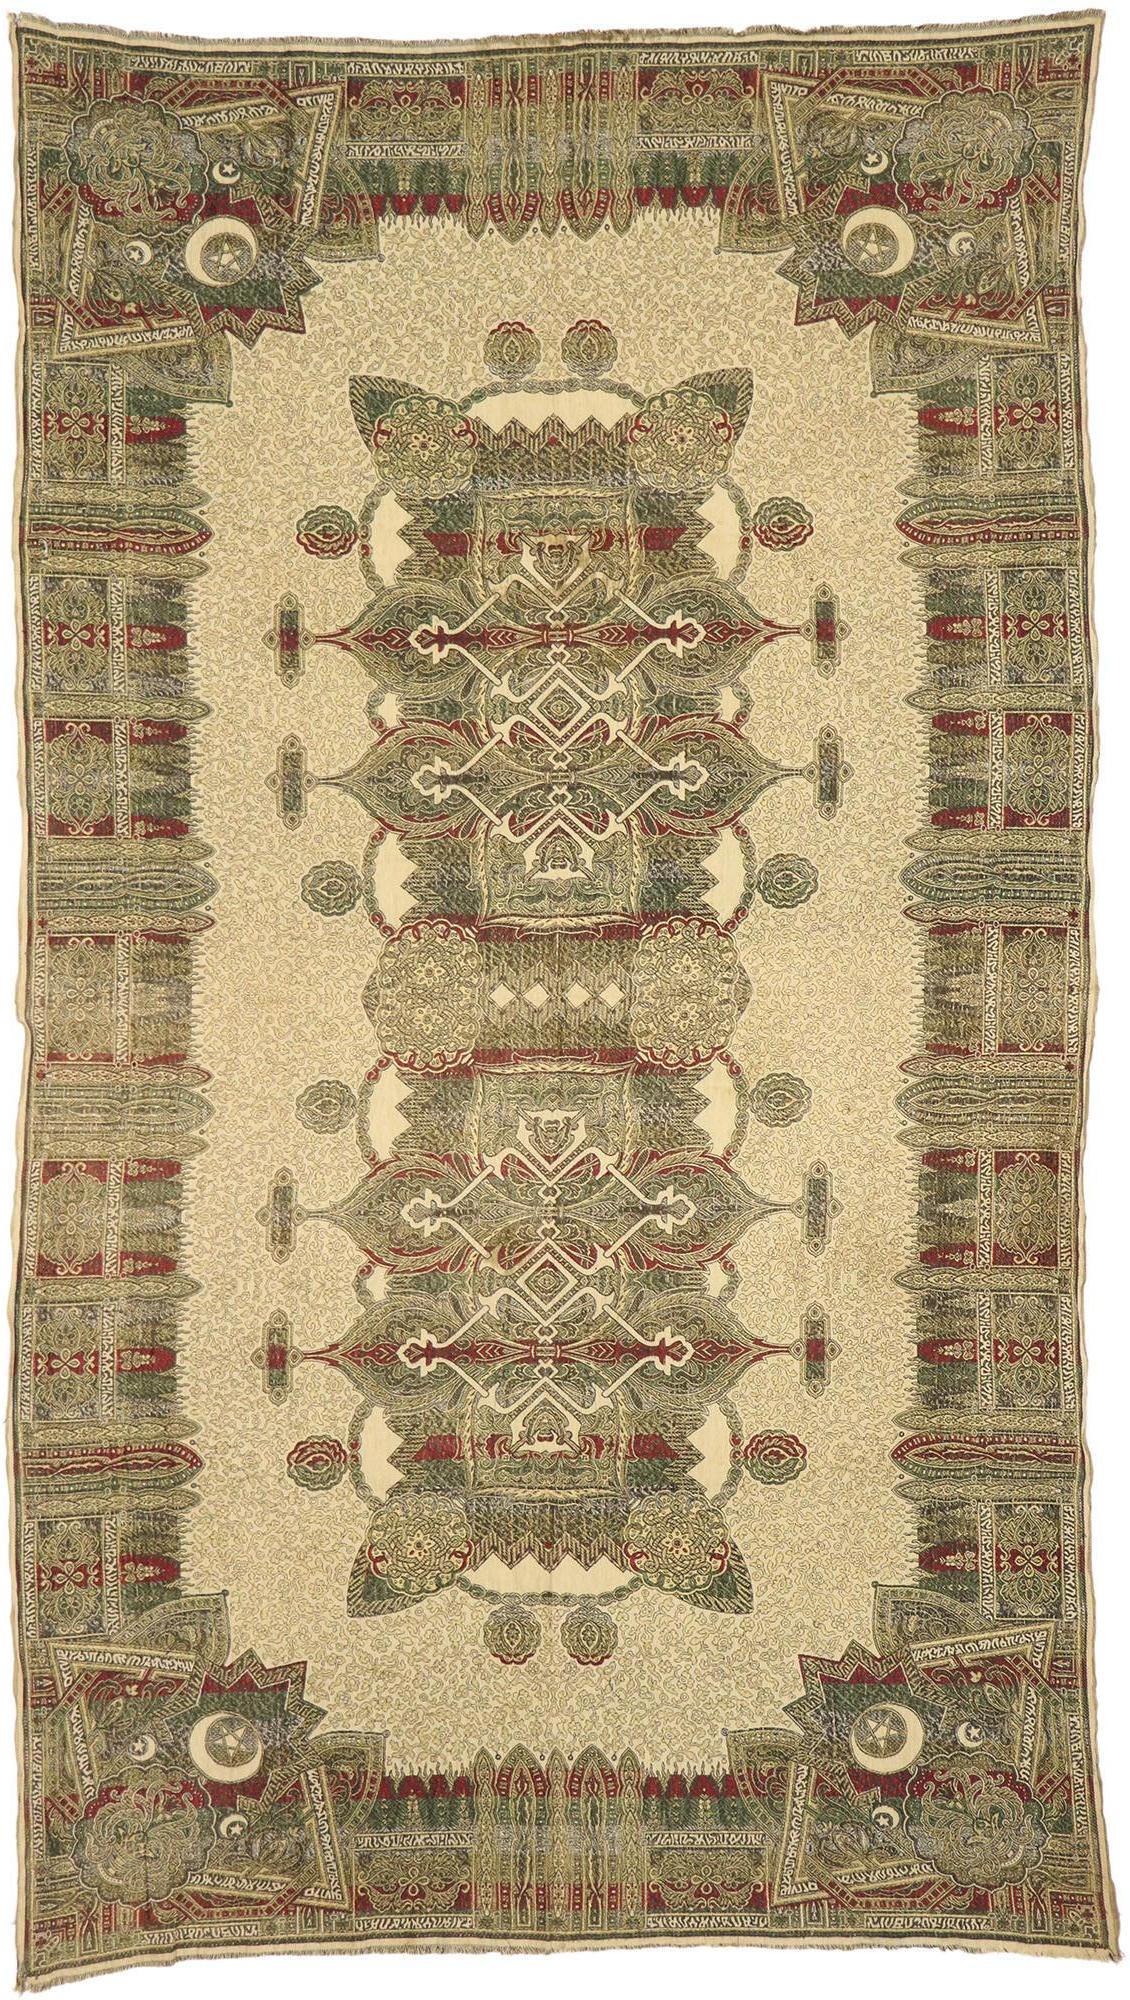 Embroidered Western European Rugs